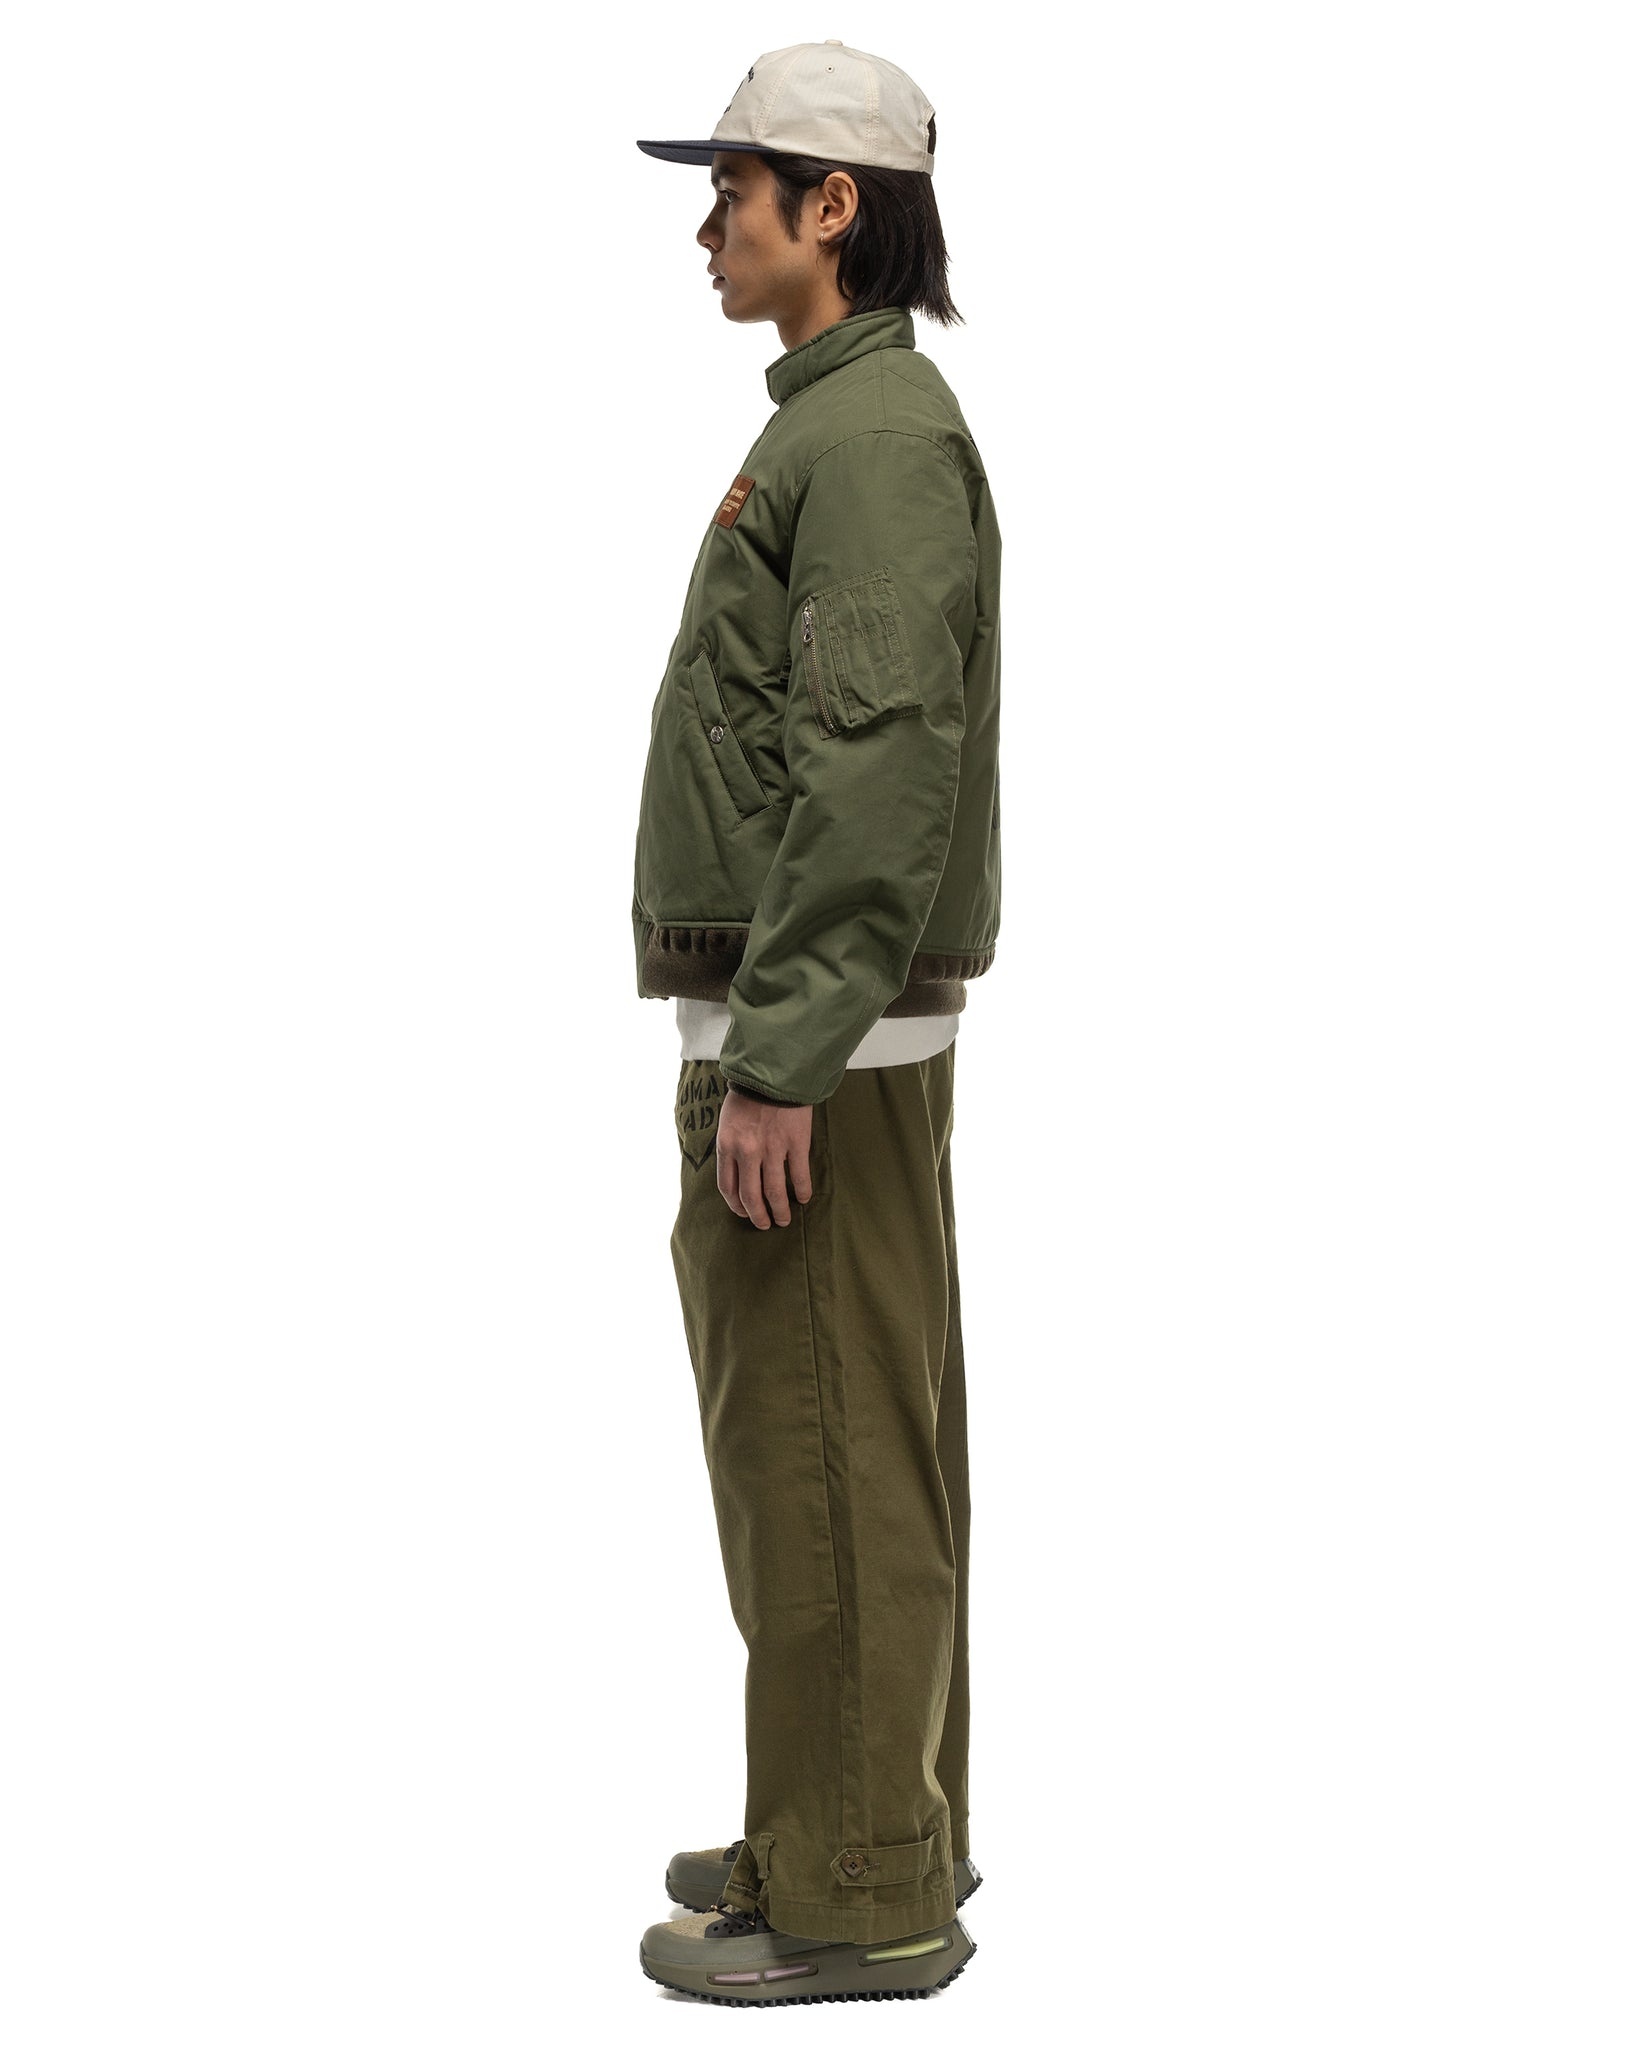 MILITARY MOTORCYCLE PANTS OLIVE DRAB - 3